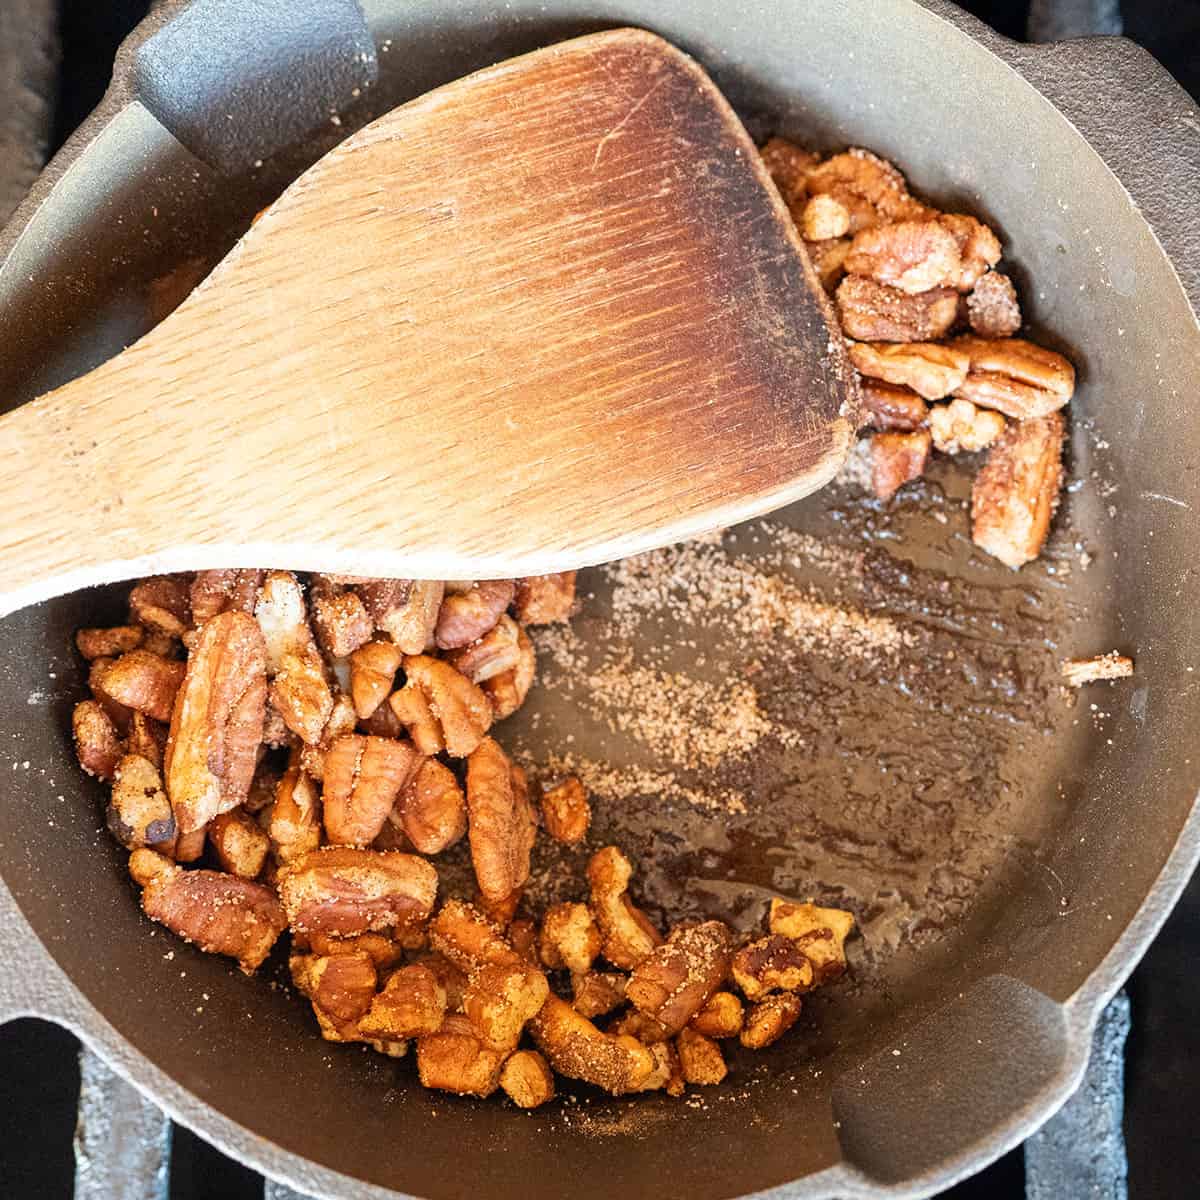 Cinnamon sugar starting to melt in pan with pecans.